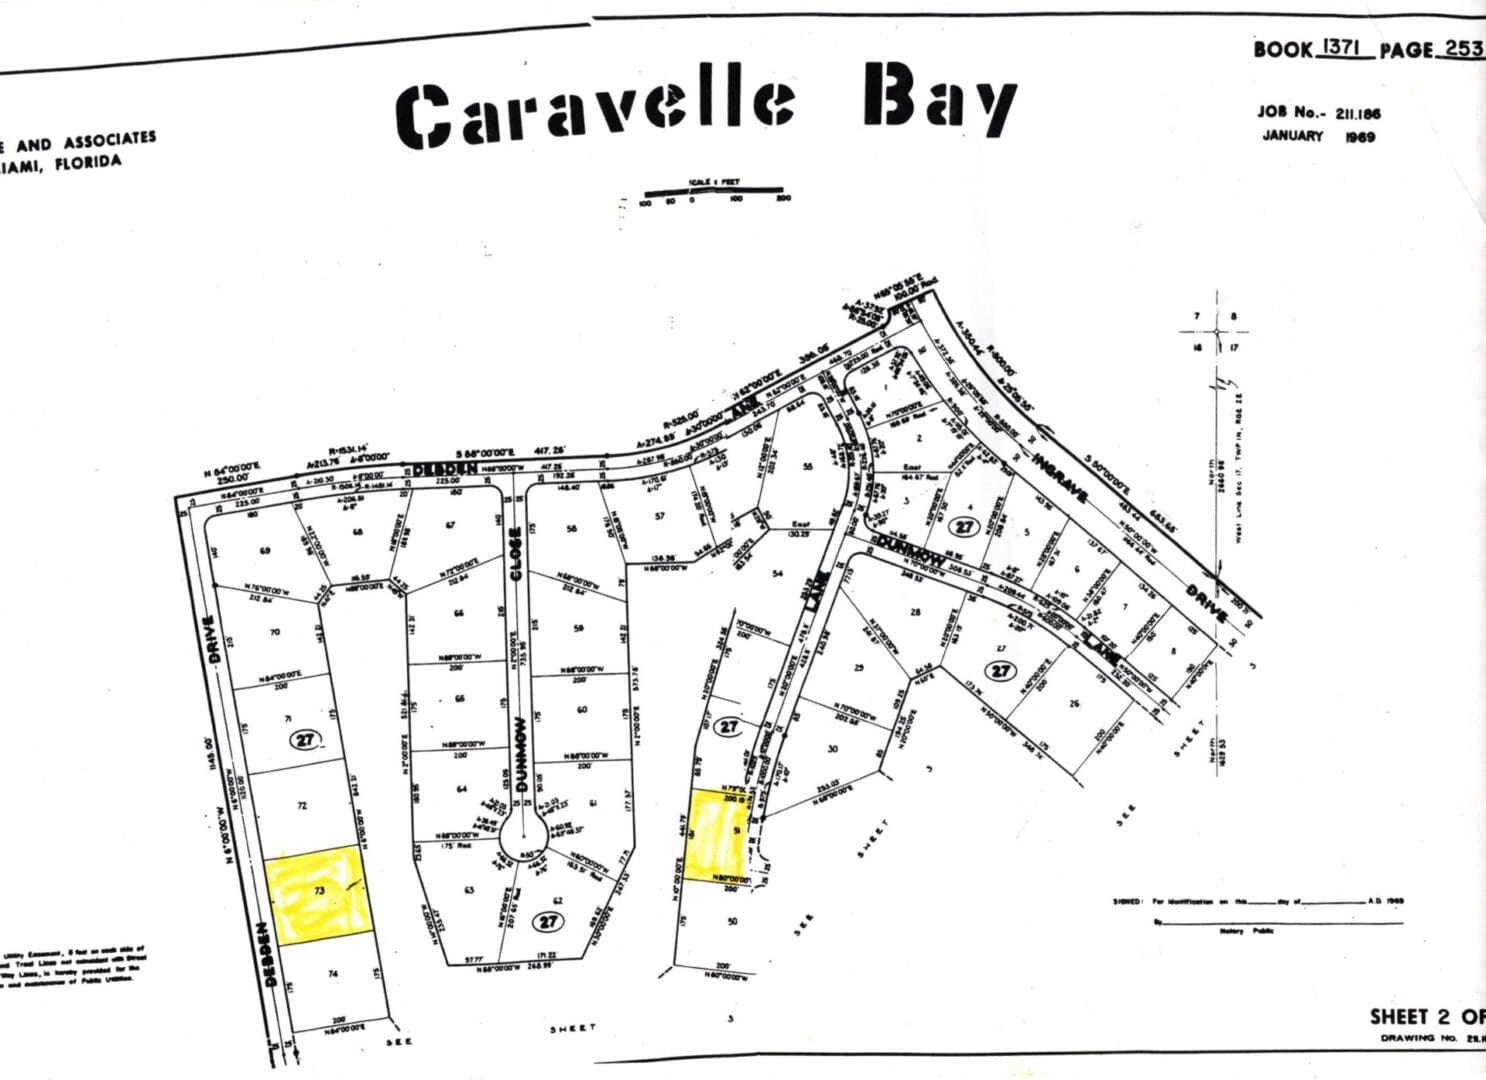 Caravelle Bay Block 27, Lot 51 and 73 (Multifamily — High-rise) Lot 51 — comprising 35,851 sq. ft. 181 on the waterfront Asking price - $160,800.00 Lot 73 — comprising 35,000 sq. ft. — 175 on the waterfront Asking price - $138,550.00 